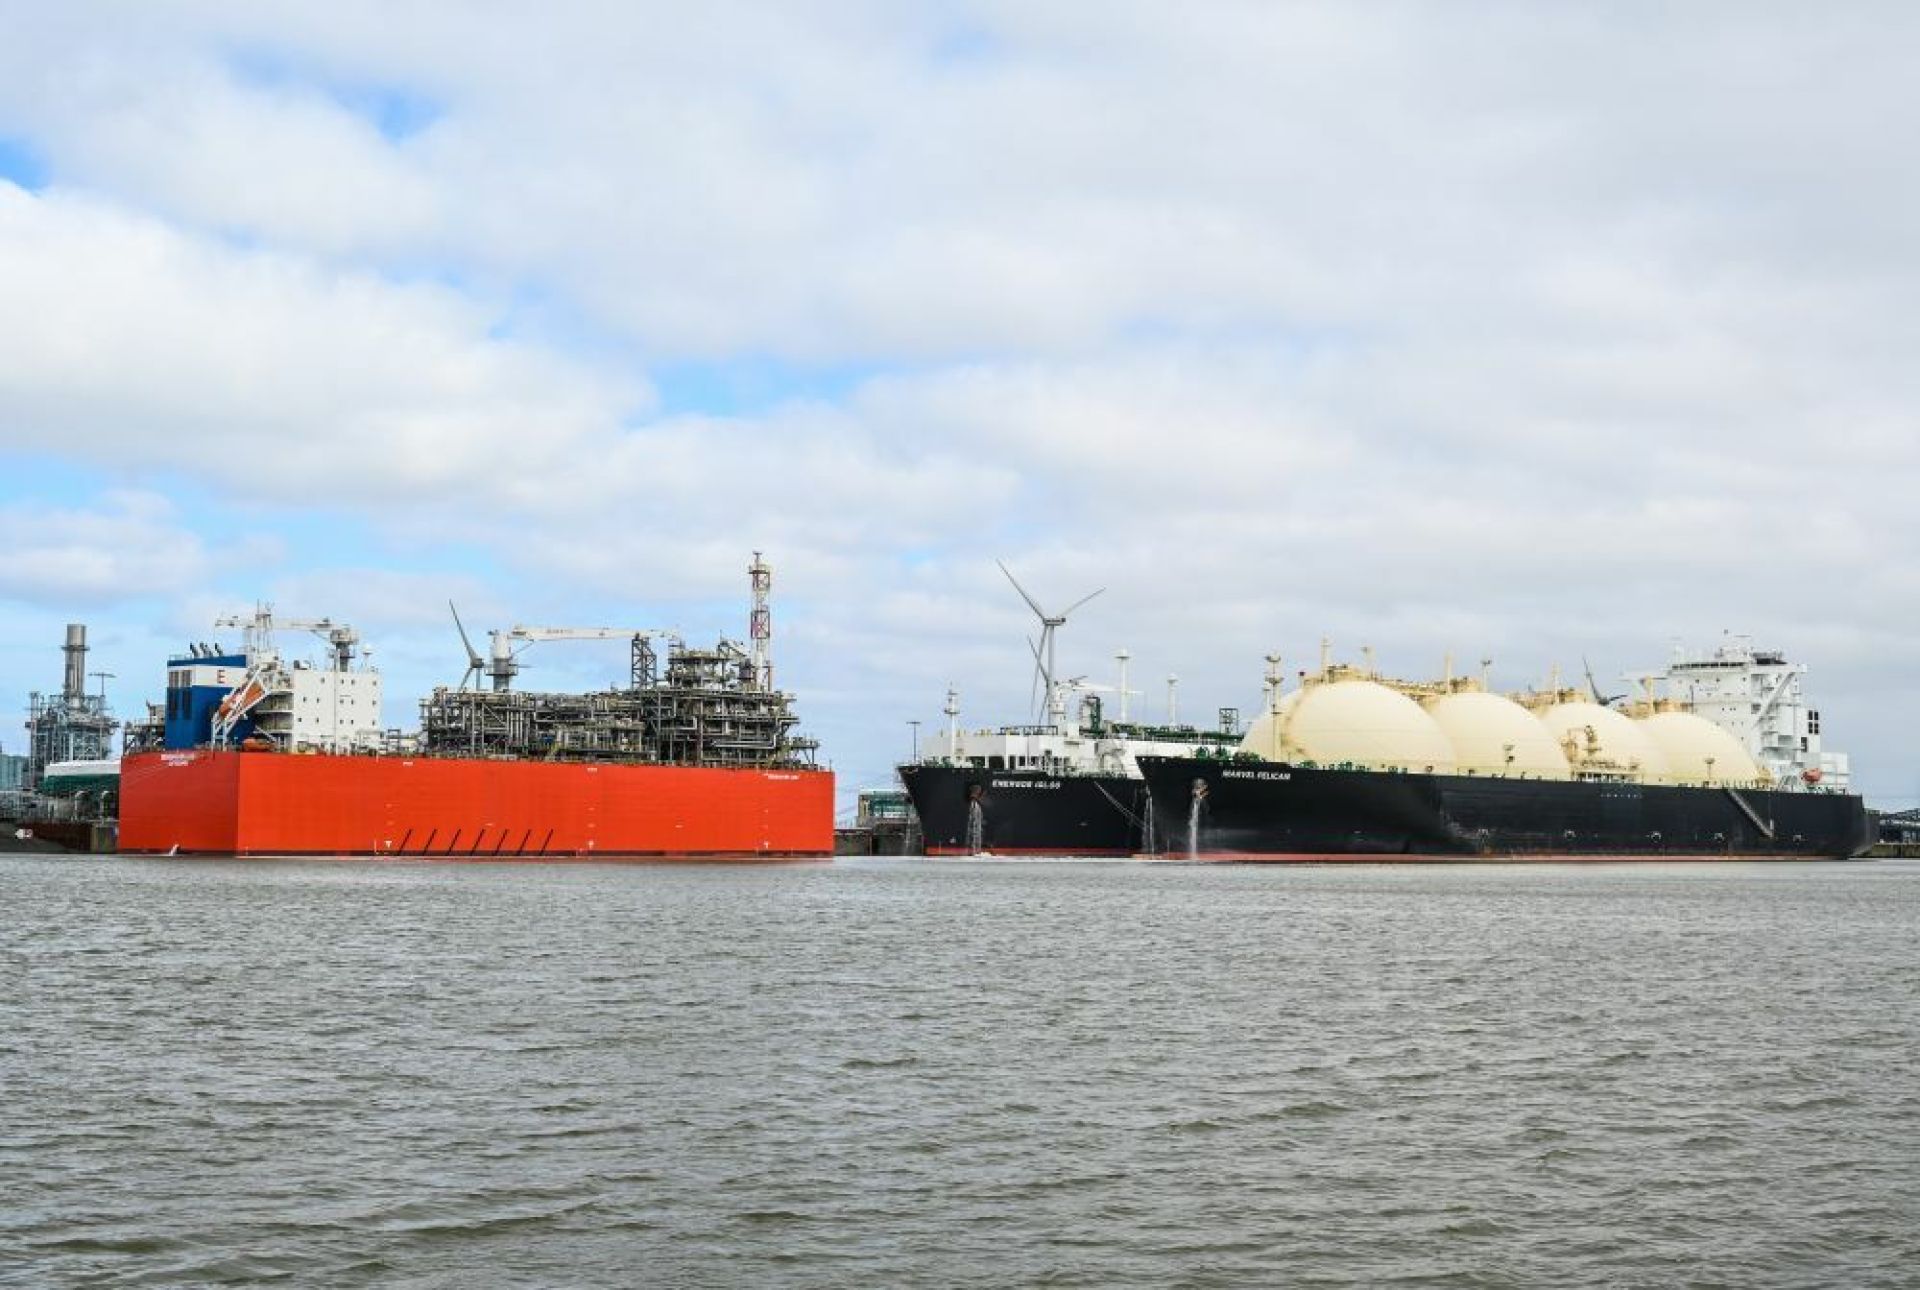 Vopak to Become Shareholder into Eemshaven LNG Terminal